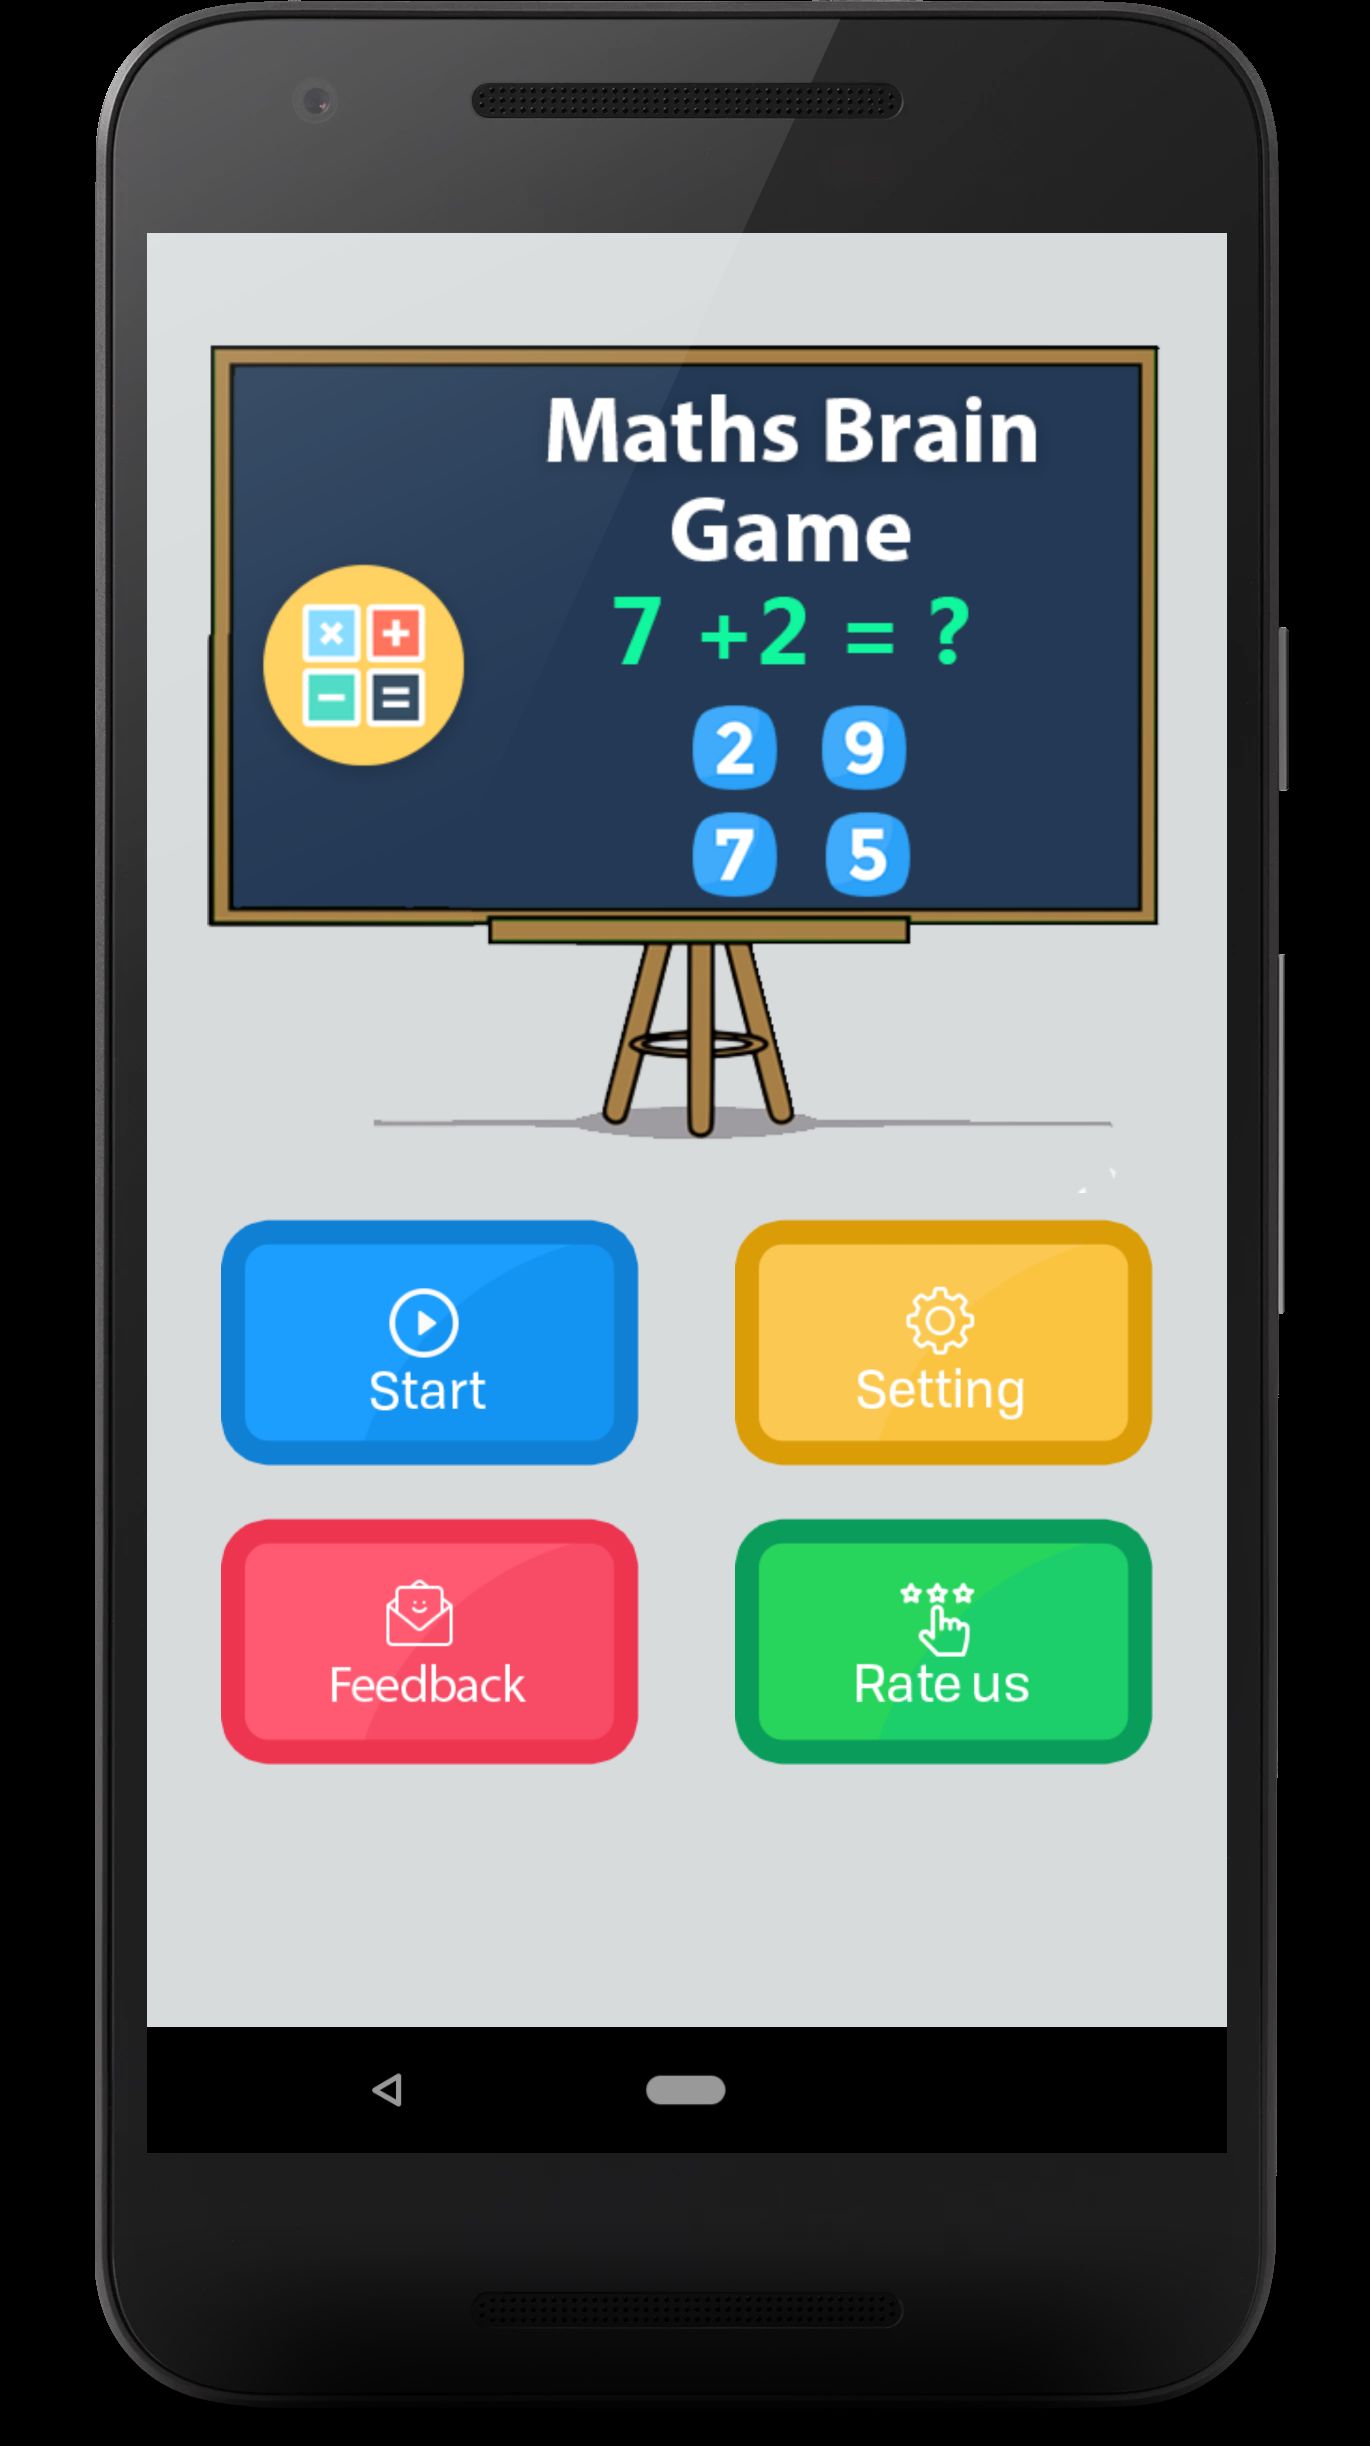 Maths Games - Android App Source Code by Victorytemplate | Codester